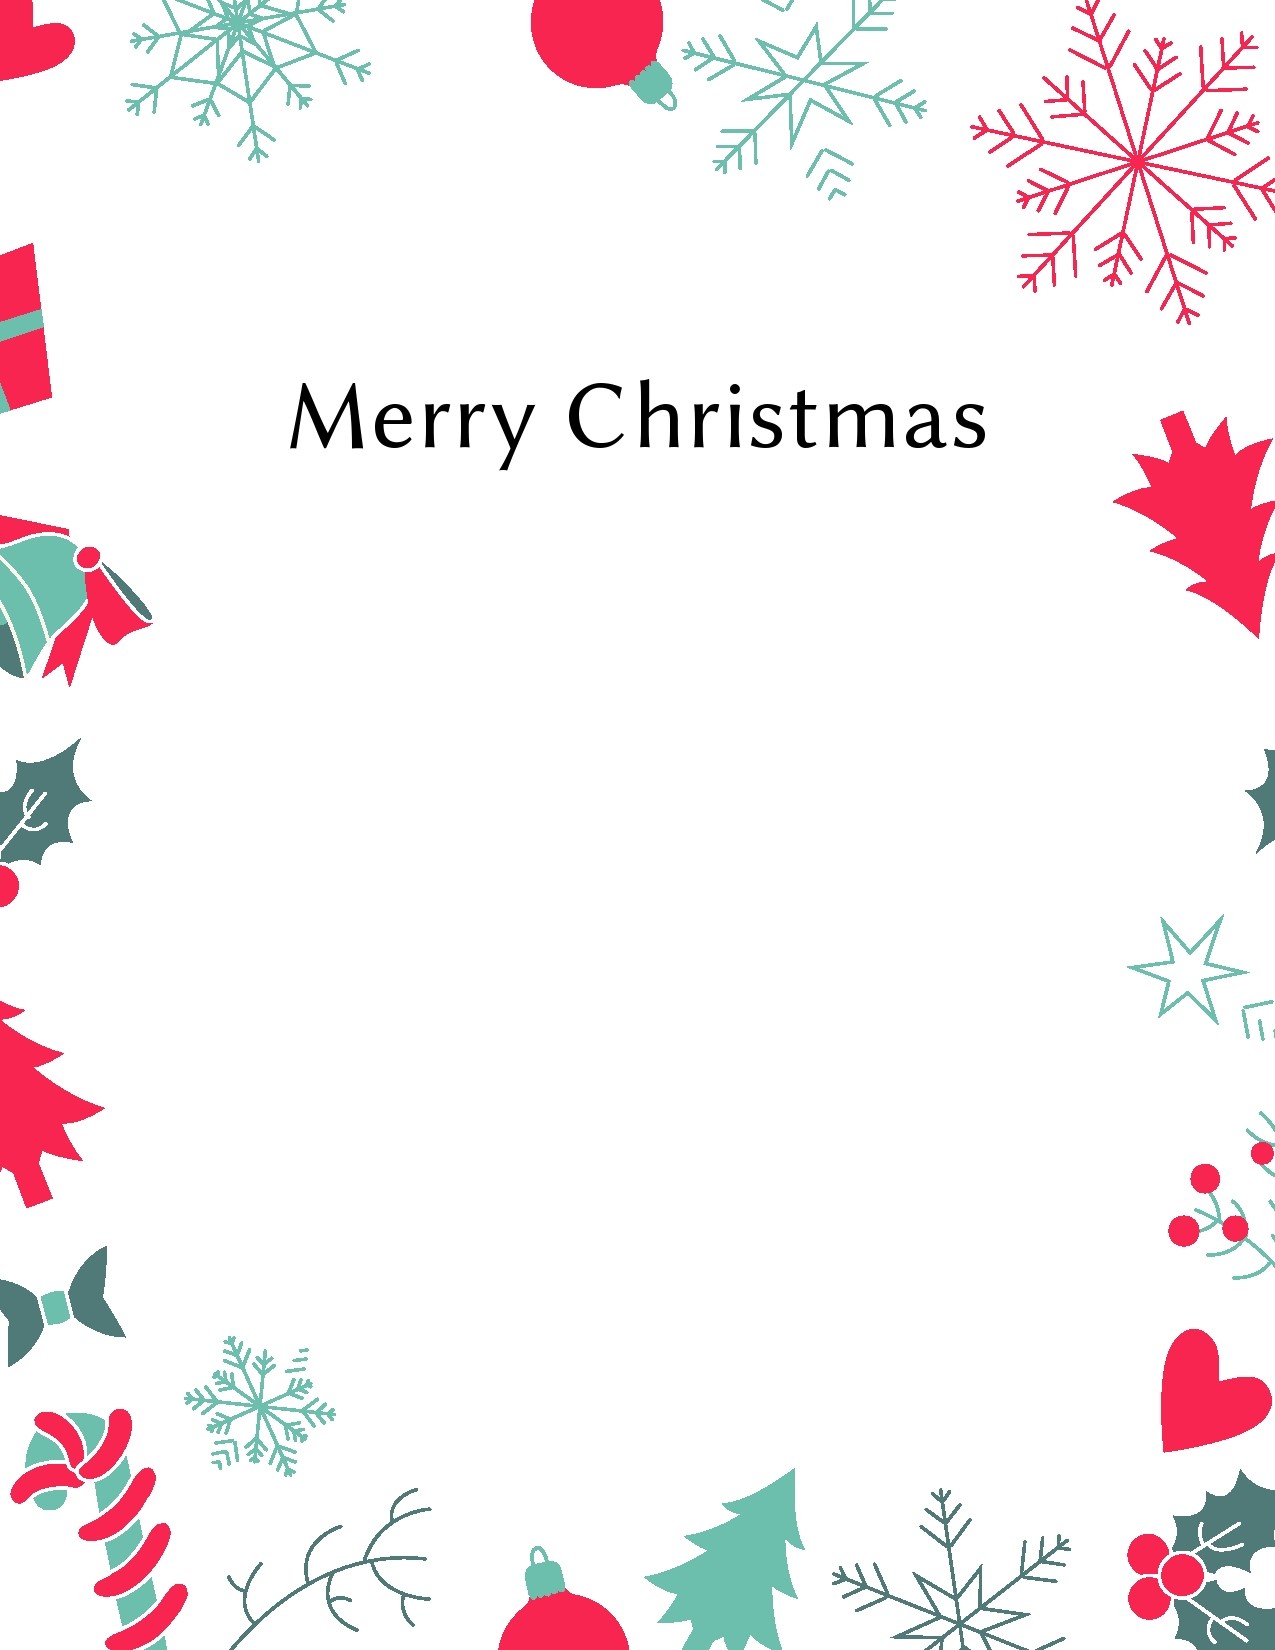 Christmas templates free download 8th standard 5 in 1 guide free download pdf